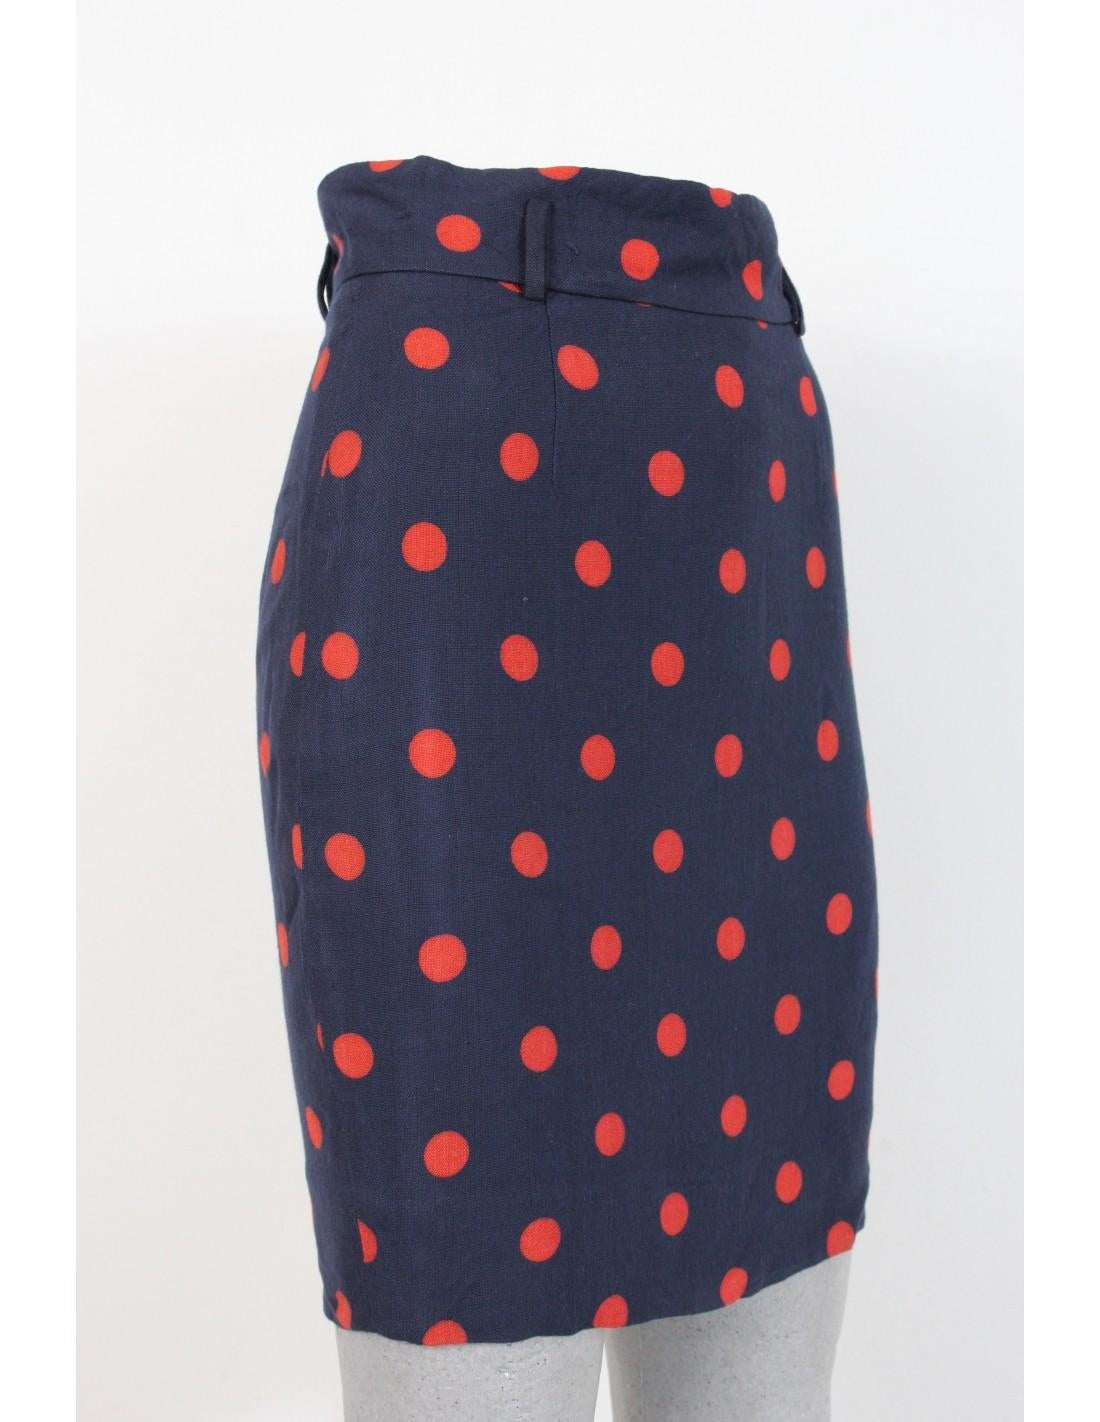 Moschino Cheap and Chic 90s vintage skirt. Short skirt, tight model on the knee. Blue and red color with polka dot pattern. Closure with zip and buttons. 100% rayon fabric. Made in Italy.

Condition: Excellent

Item used few times, it remains in its